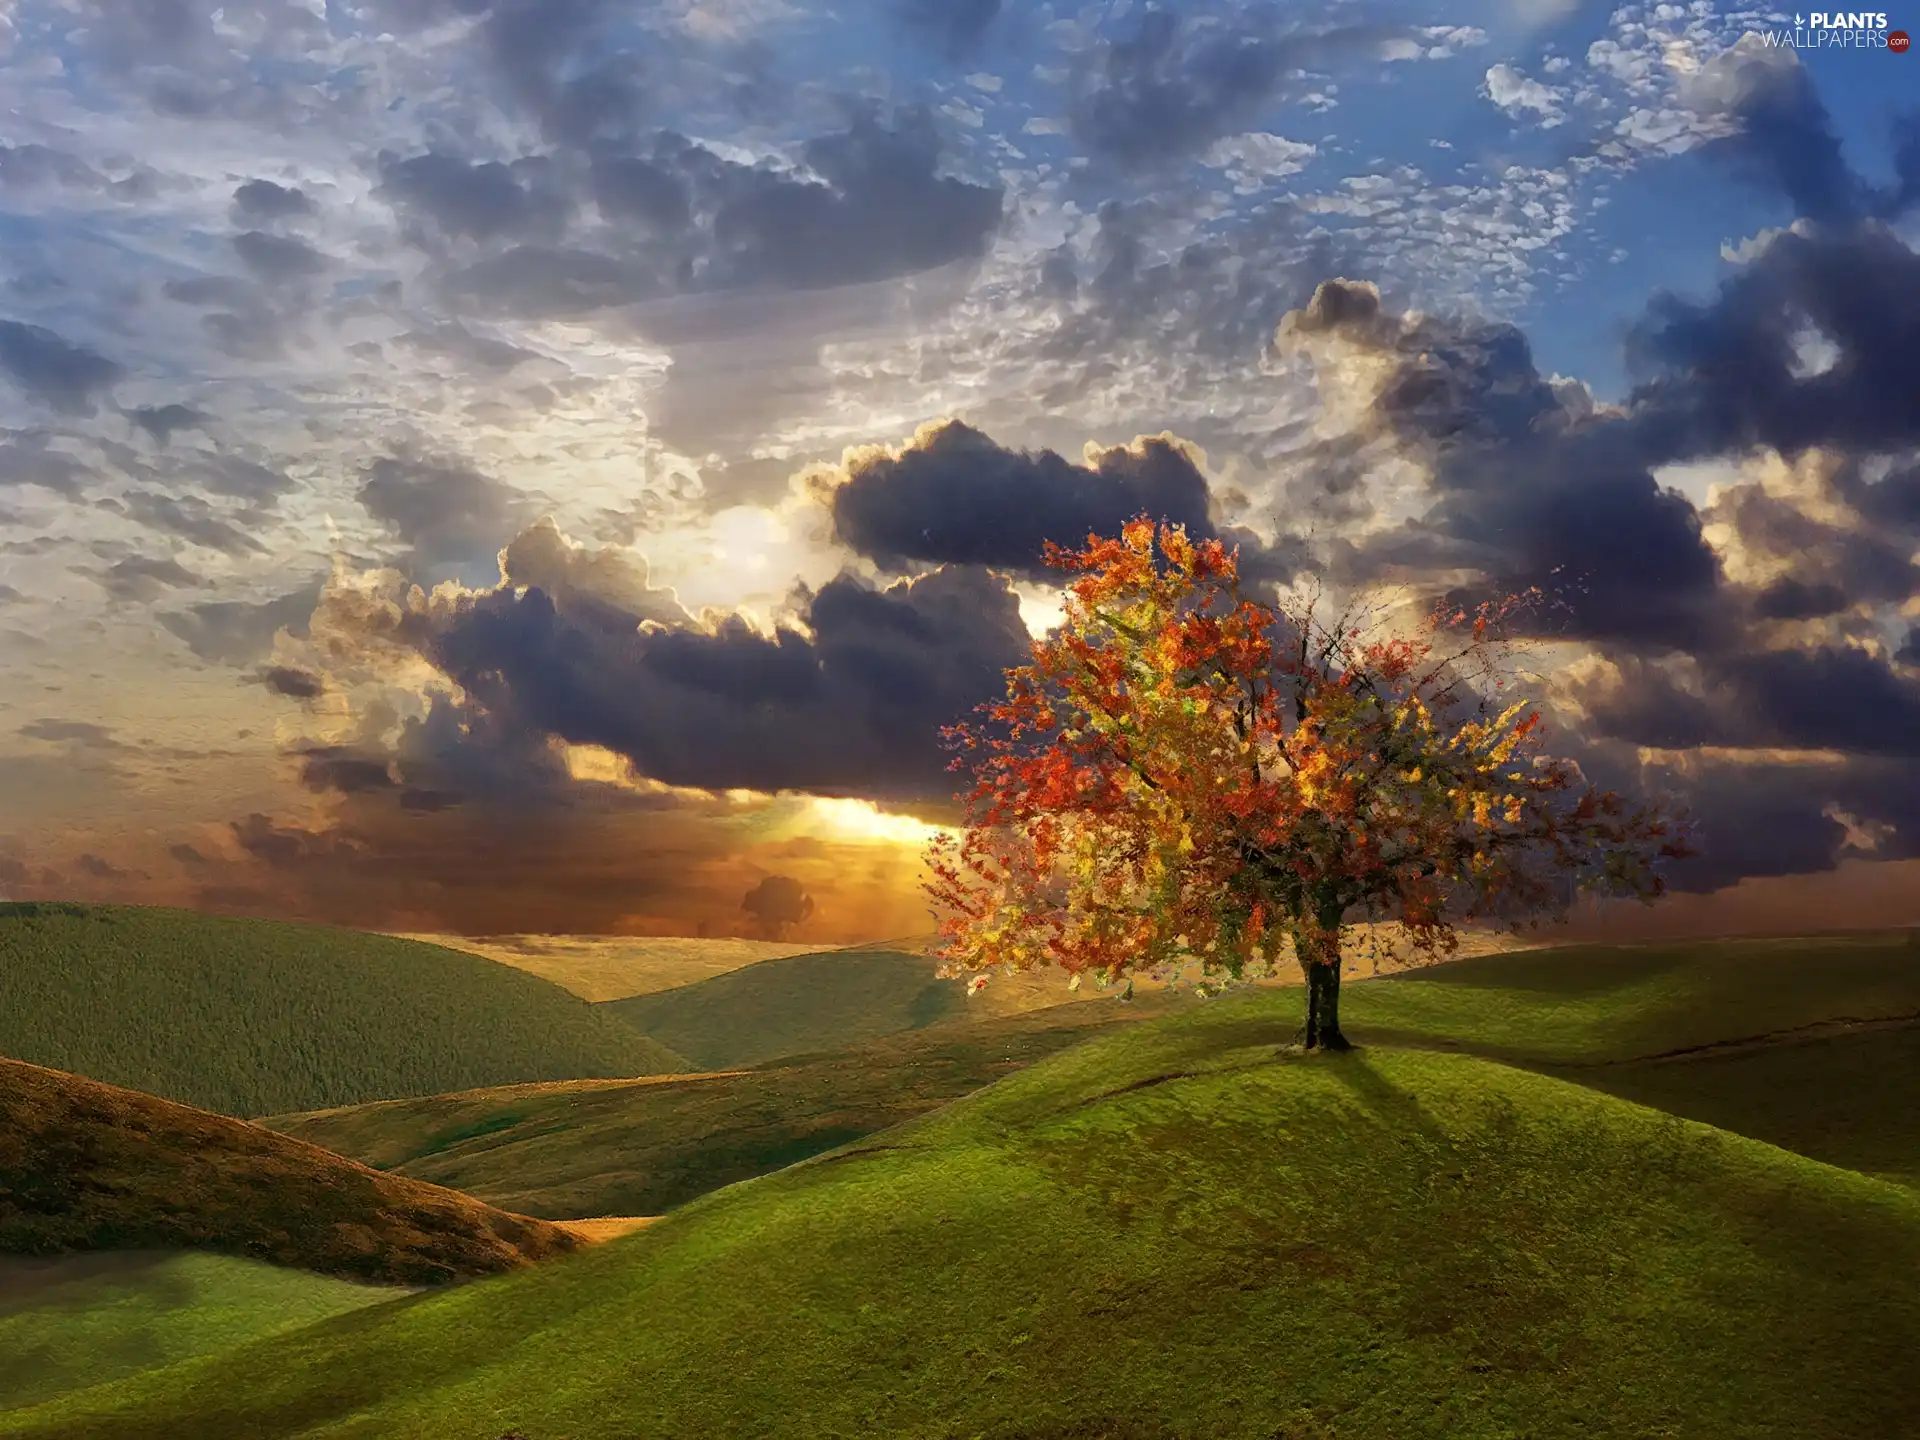 hills, trees, west, sun, clouds